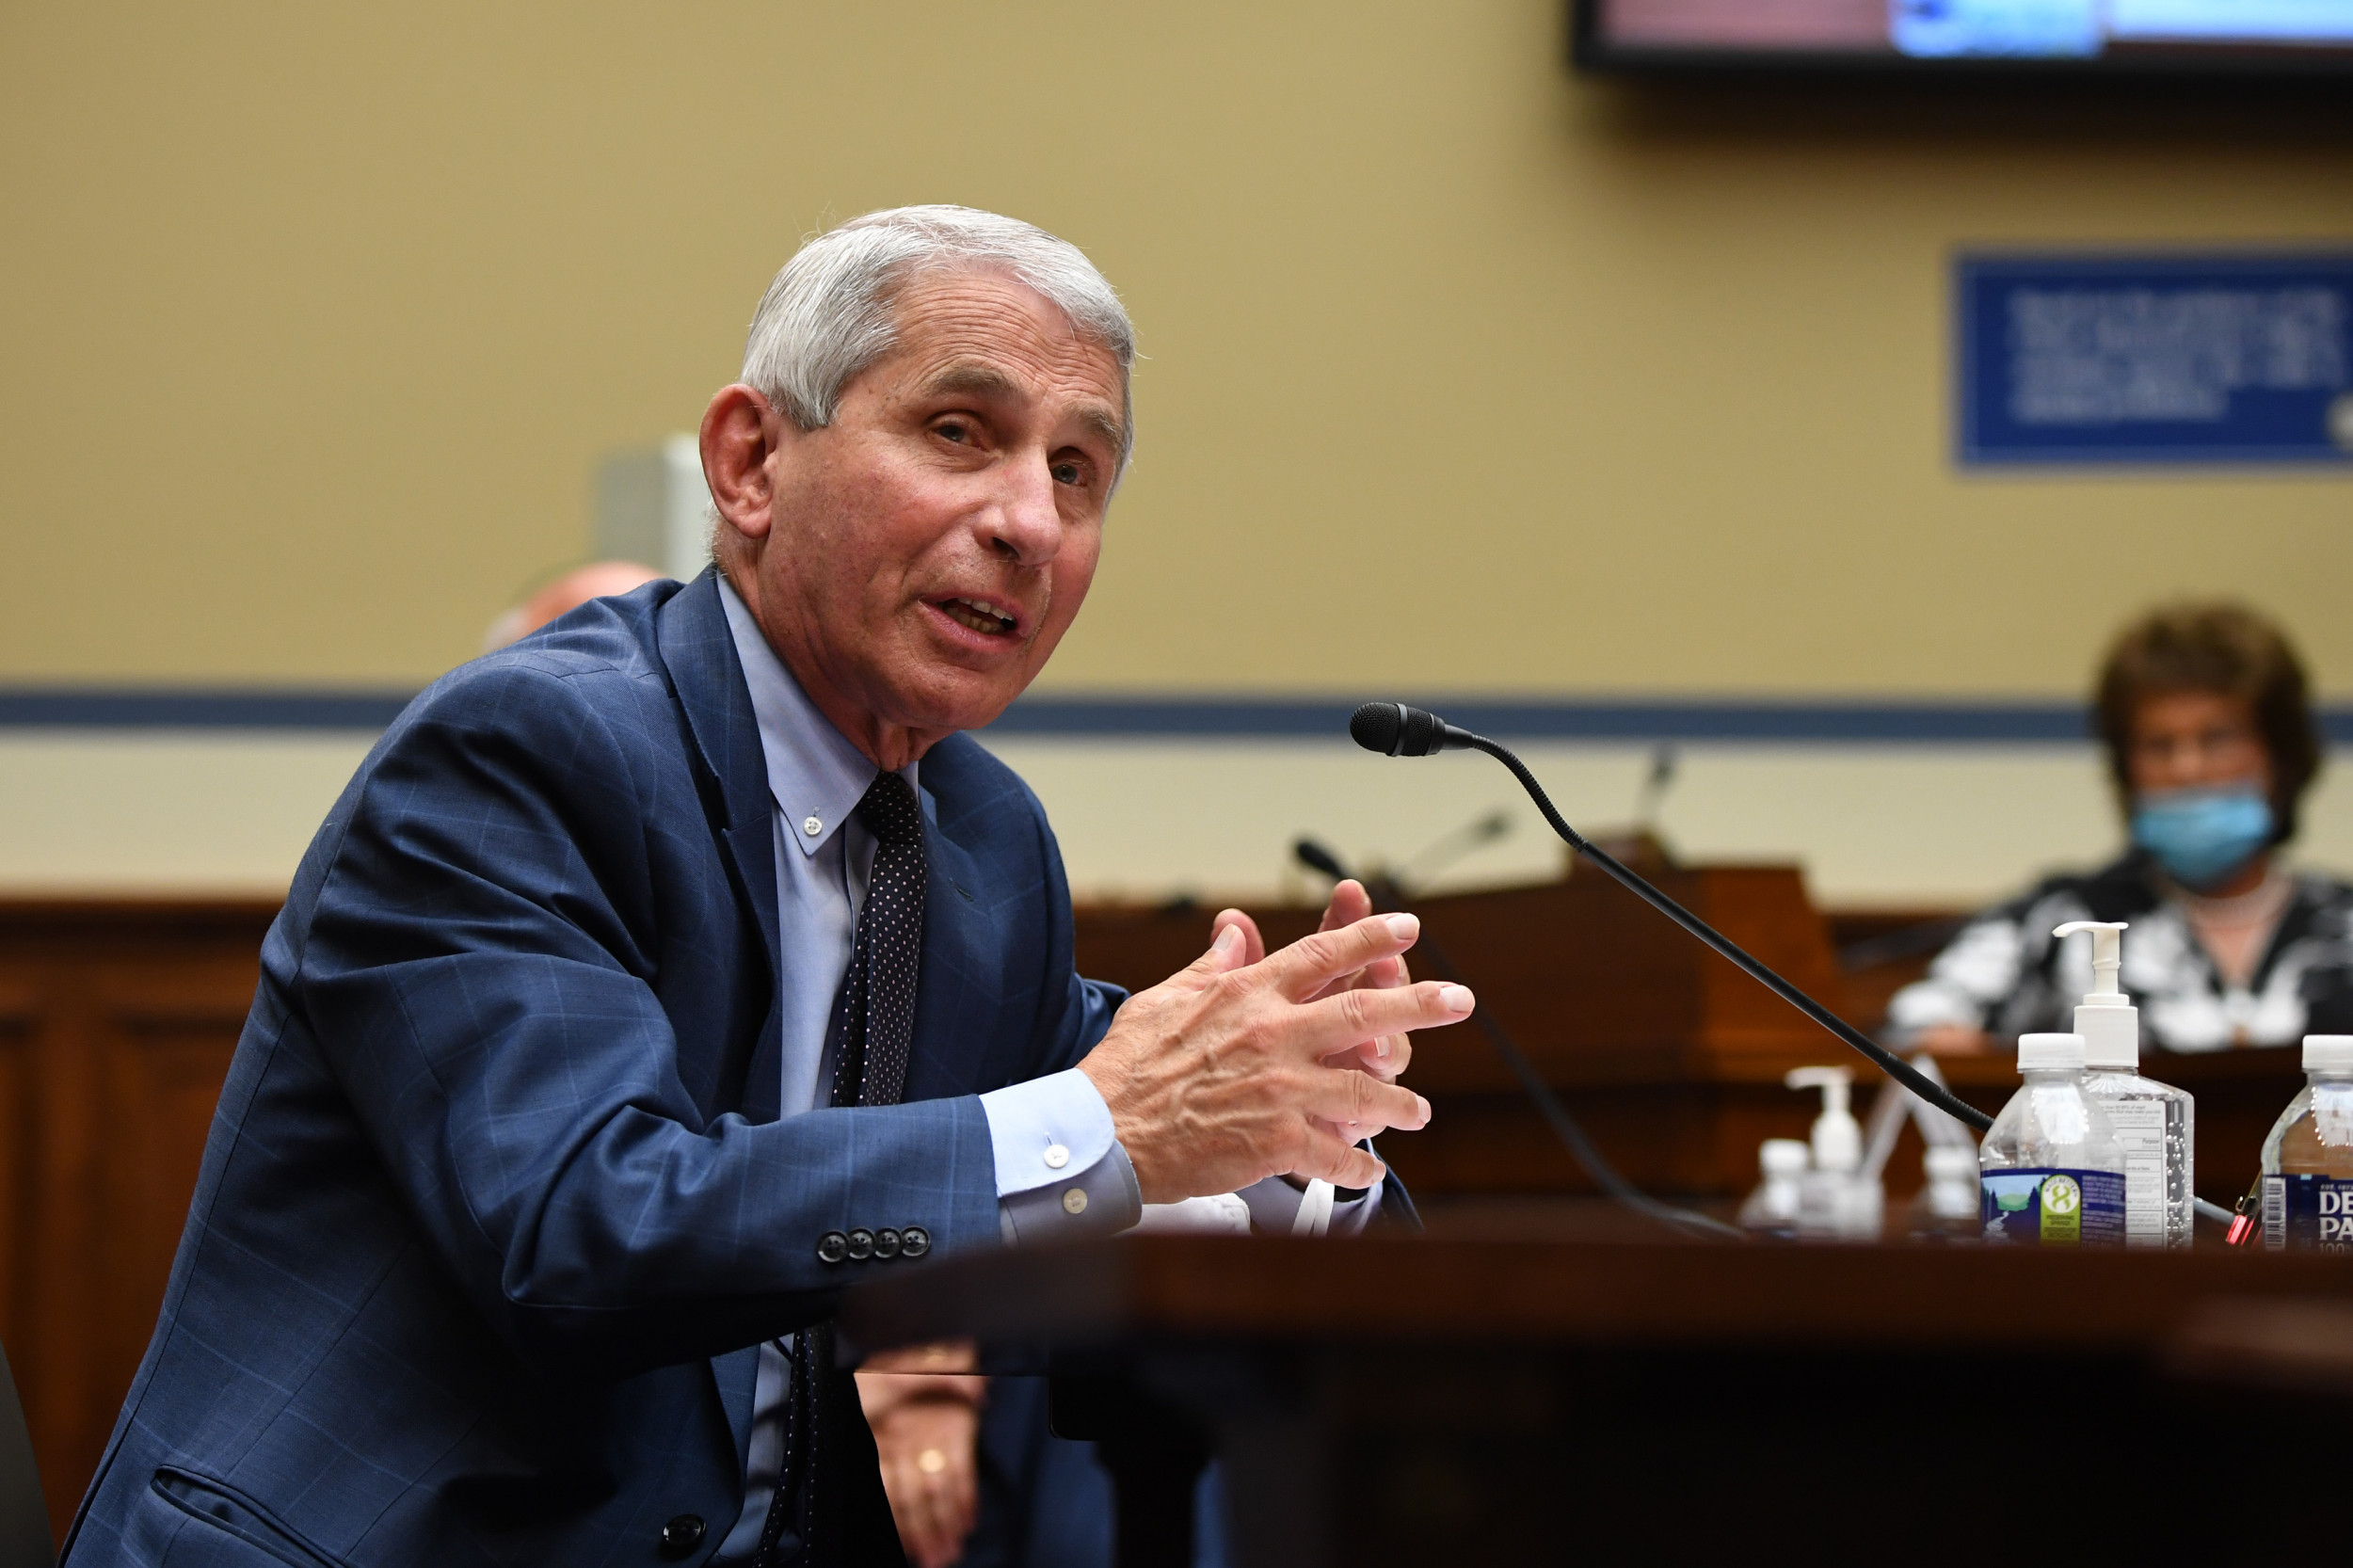 Fauci’s NIAID Co-Worker Secretly Mocked, Criticized Him Using Pseudonym on Conservative Website: Report